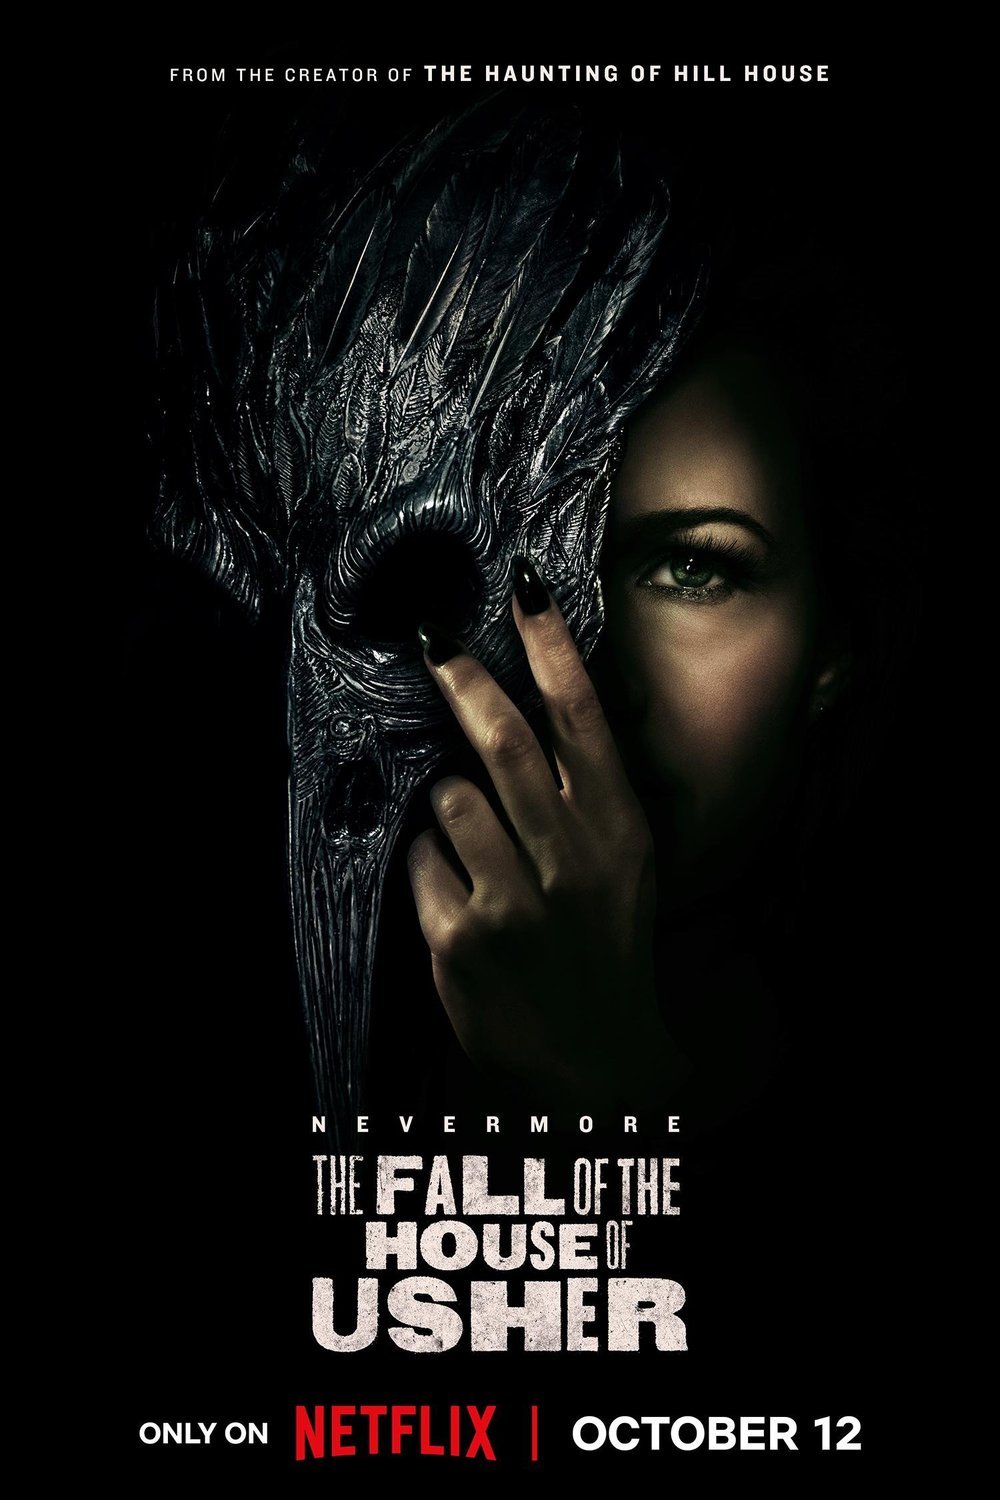 L'affiche du film The Fall of the House of Usher